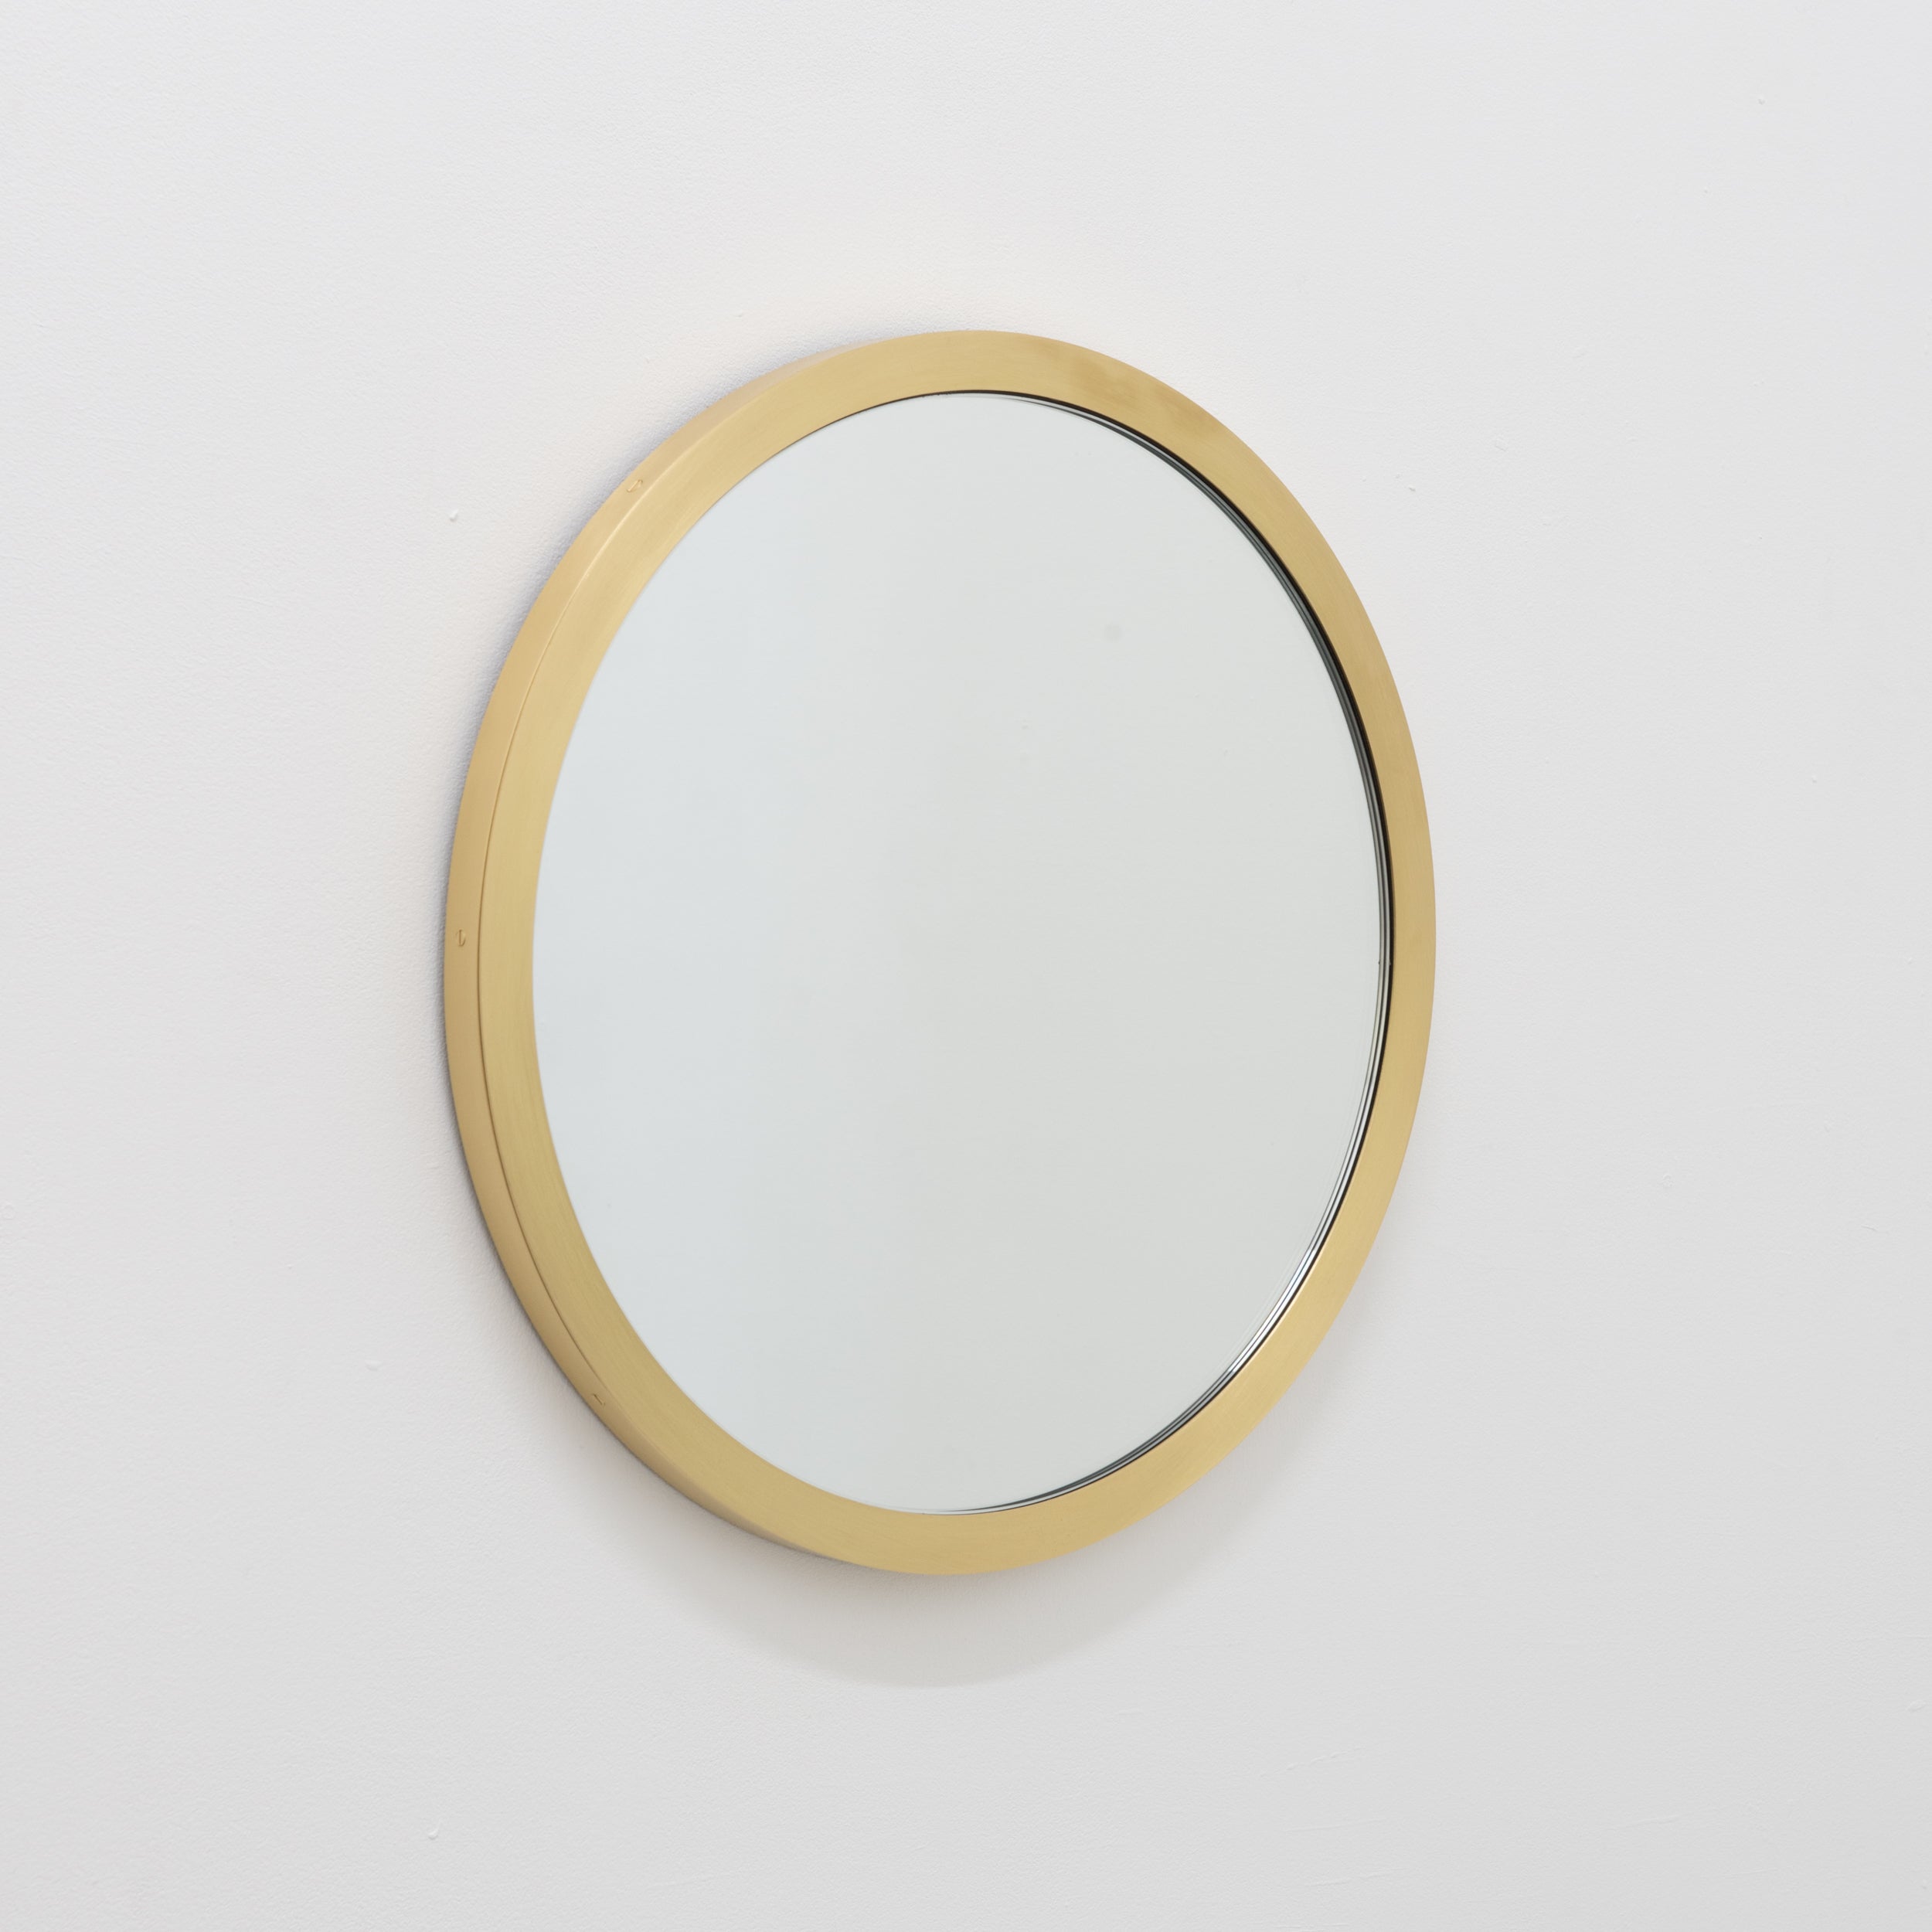 Modern Orbis™ round mirror with a full solid brushed brass frame.

Our 'Full Frame' design maintains the chic and elegant style of Alguacil & Perkoff's signature 'Minimalist Frame' mirrors, yet placing more emphasis on the solid brass. The designer